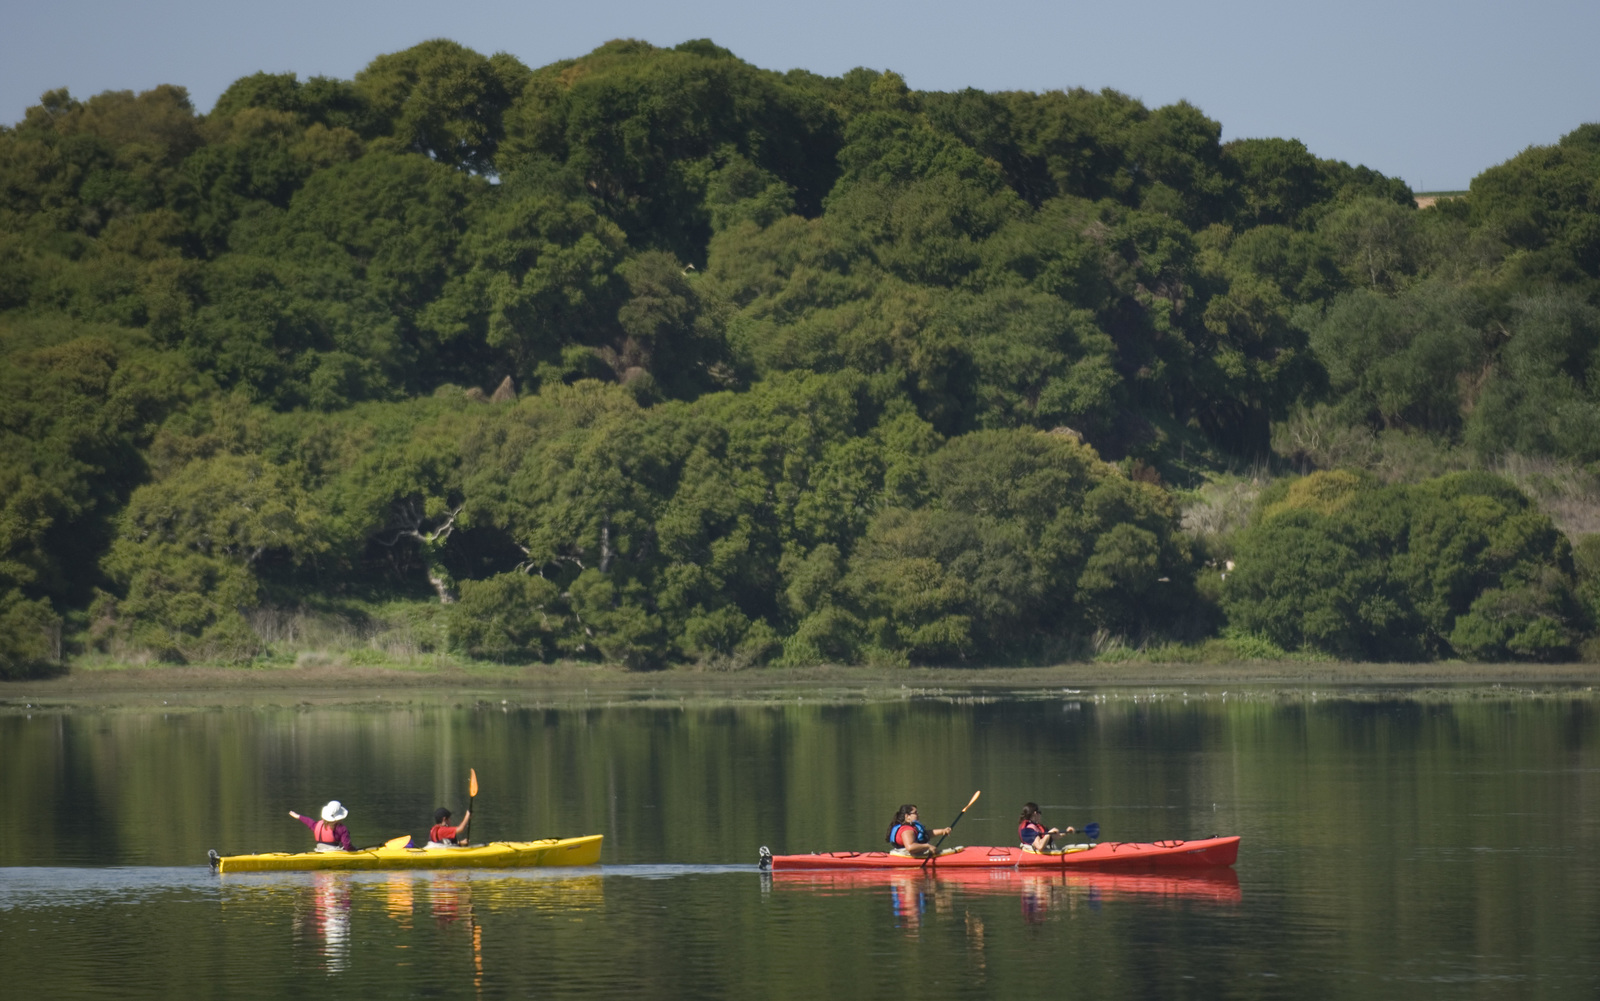 Kayaks on Elkhorn Slough, the largest tract of tidal salt marsh in CA outside of San Francisco Bay. The Conservancy's Porter Ranch and other properties overlook and buffer Elkhorn Slough. ©Mark Godfrey/TNC